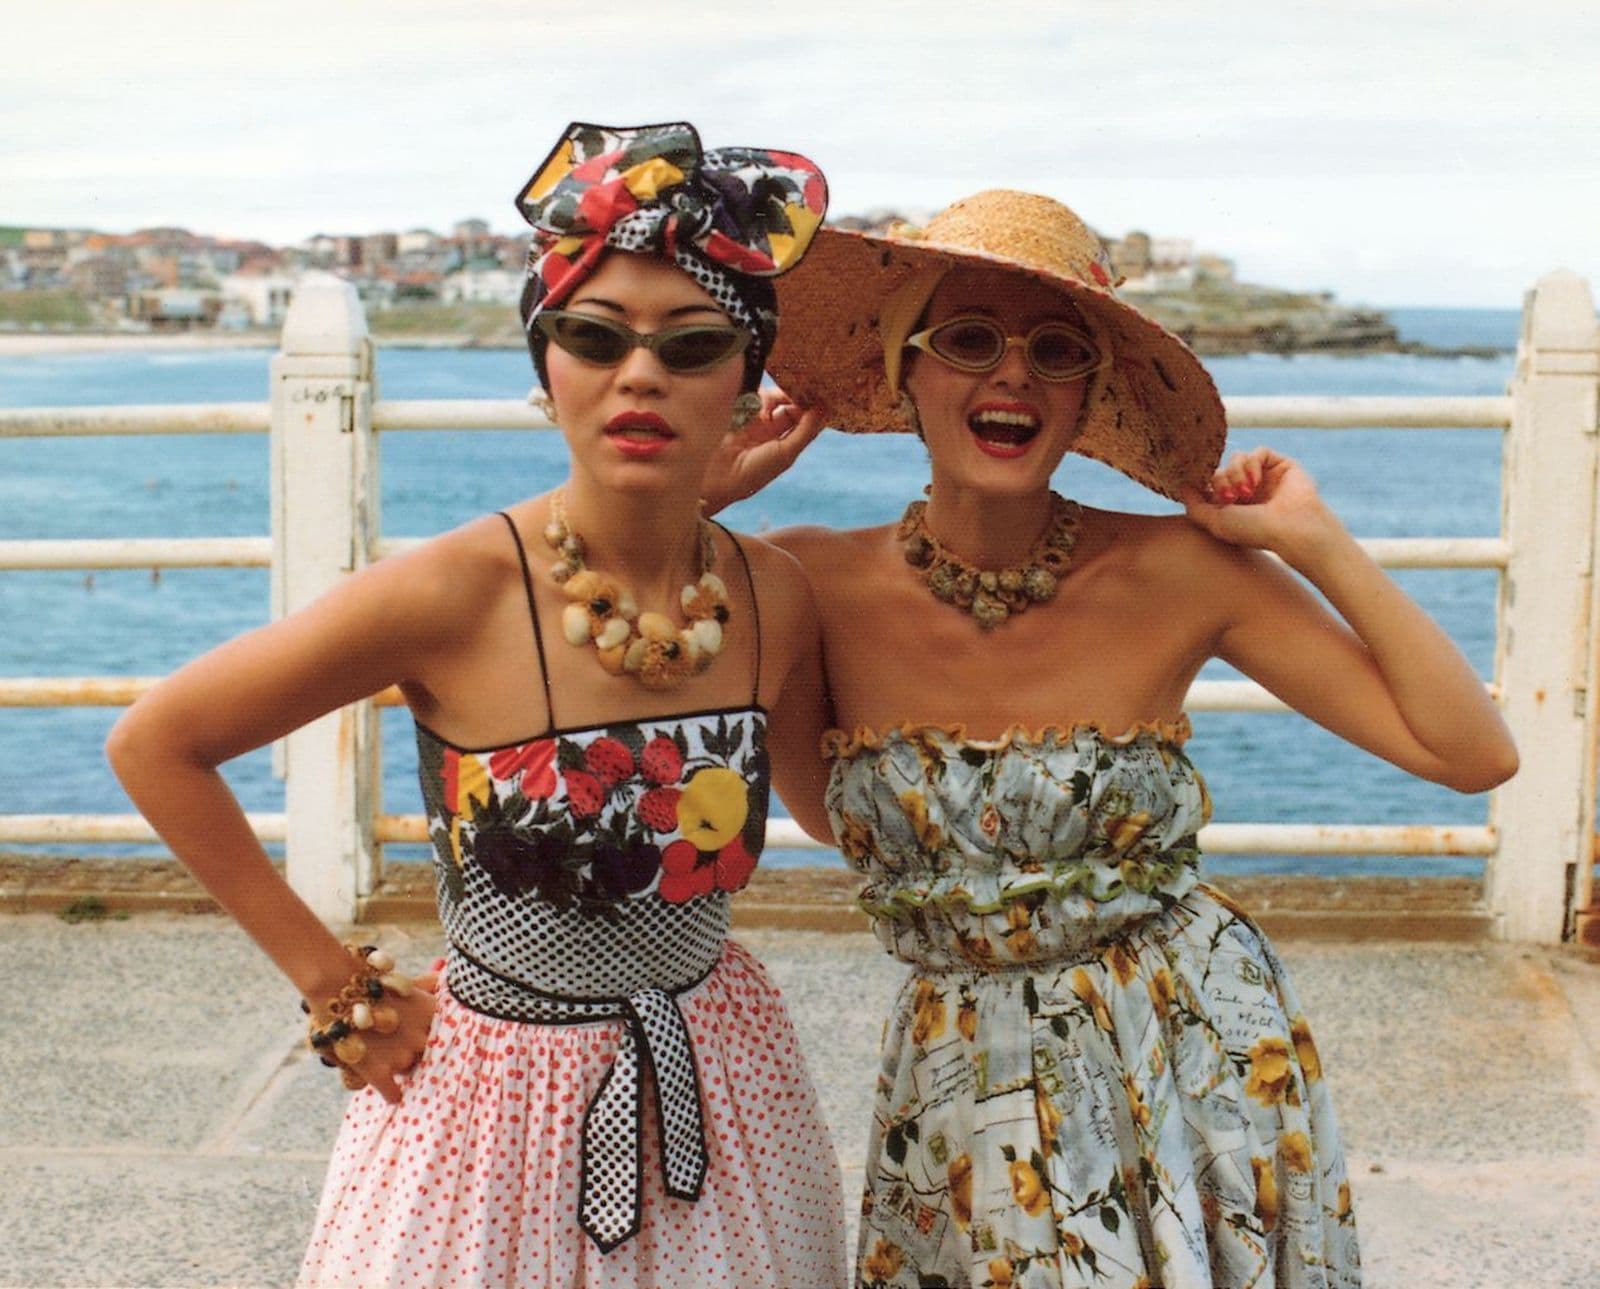 Two woman in bright hats, jewellery, sunglasses and dresses have their arms around each other, posing for a photograph